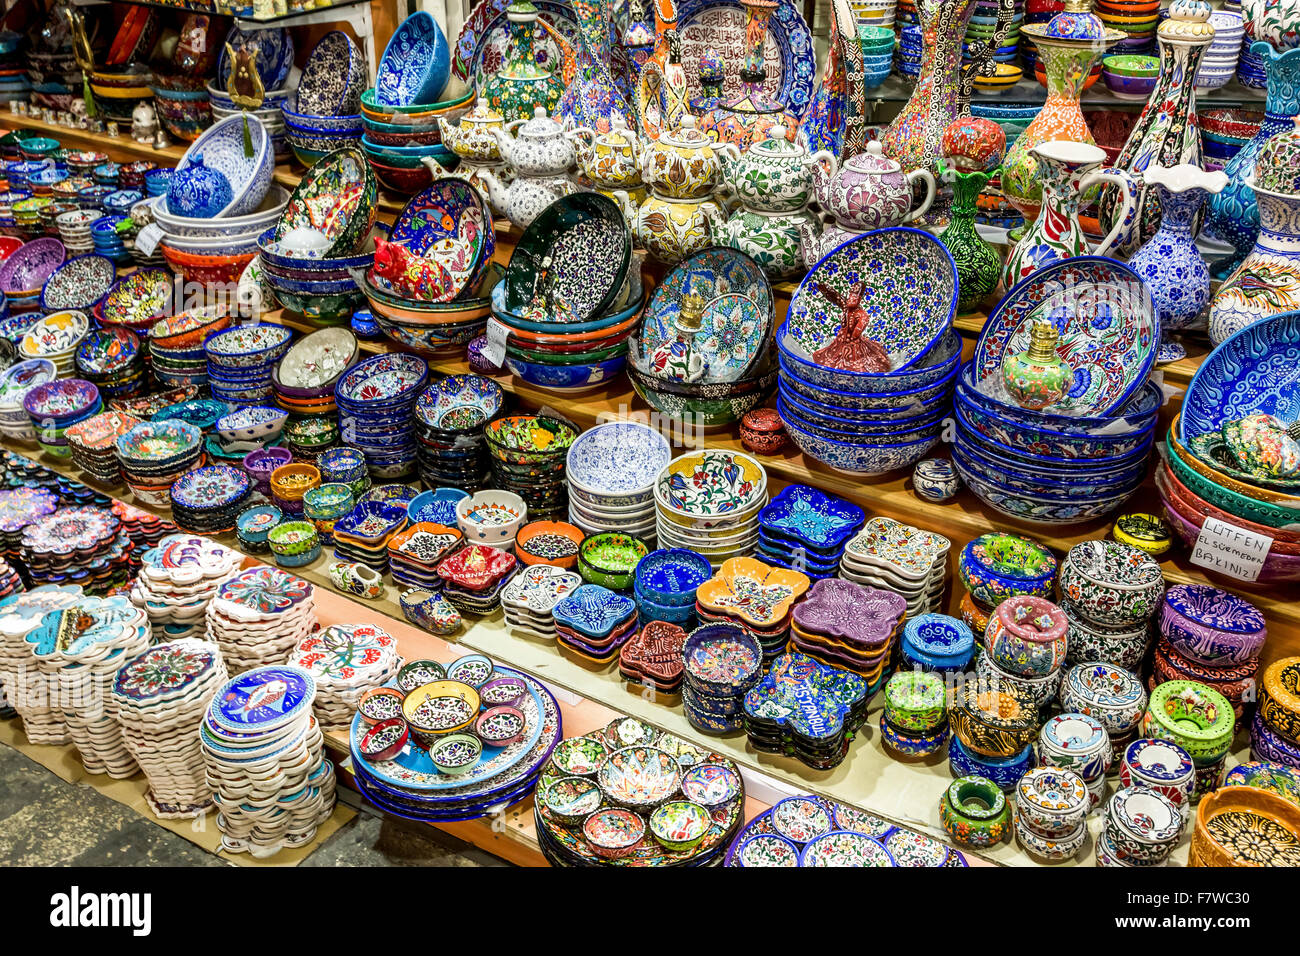 Colorful Tableware at Shop in the Grand Bazaar, Istanbul, Turkey Stock Photo